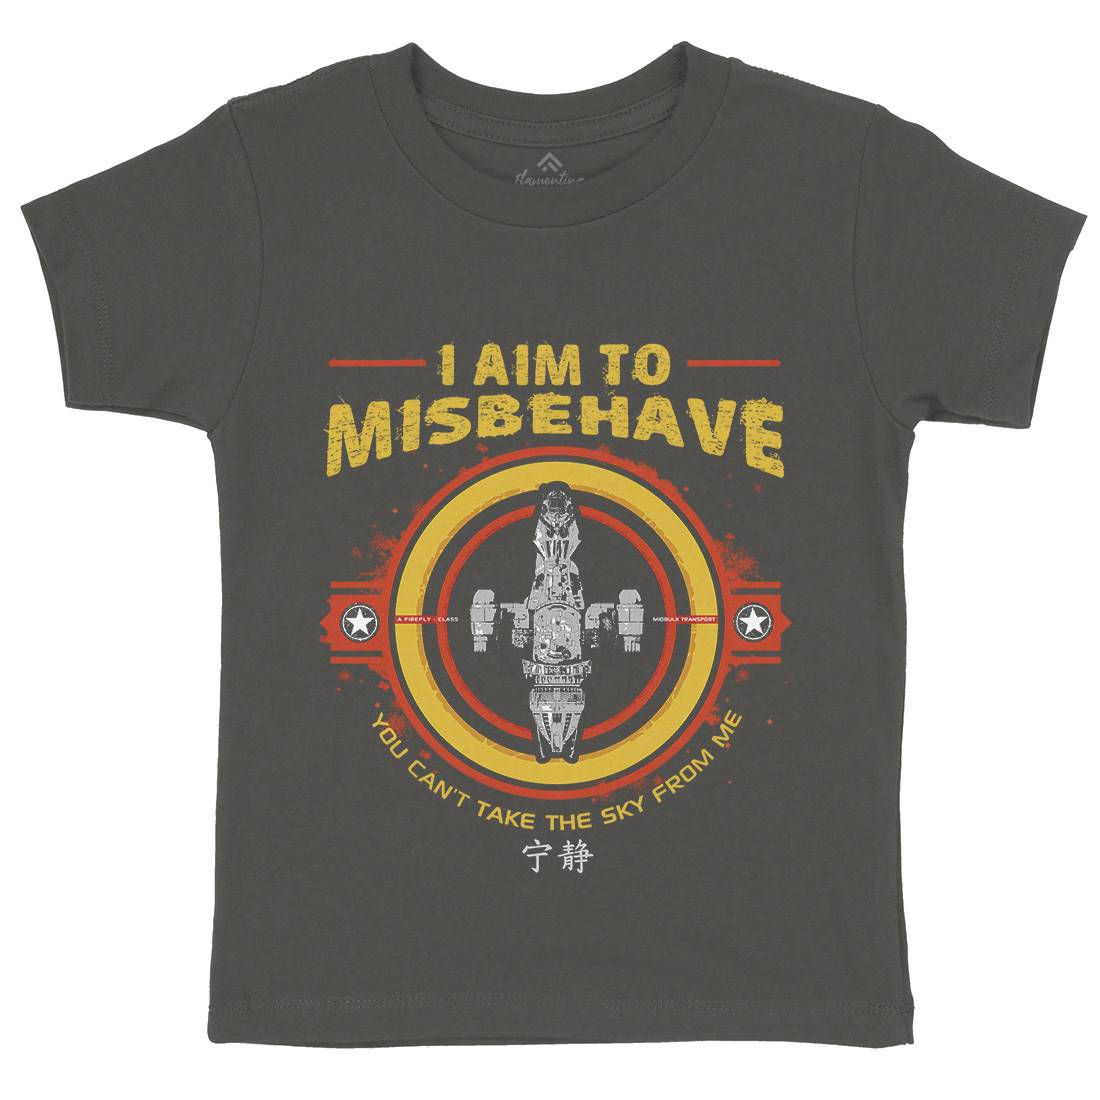 I Aim To Misbehave Kids Organic Crew Neck T-Shirt Space D352